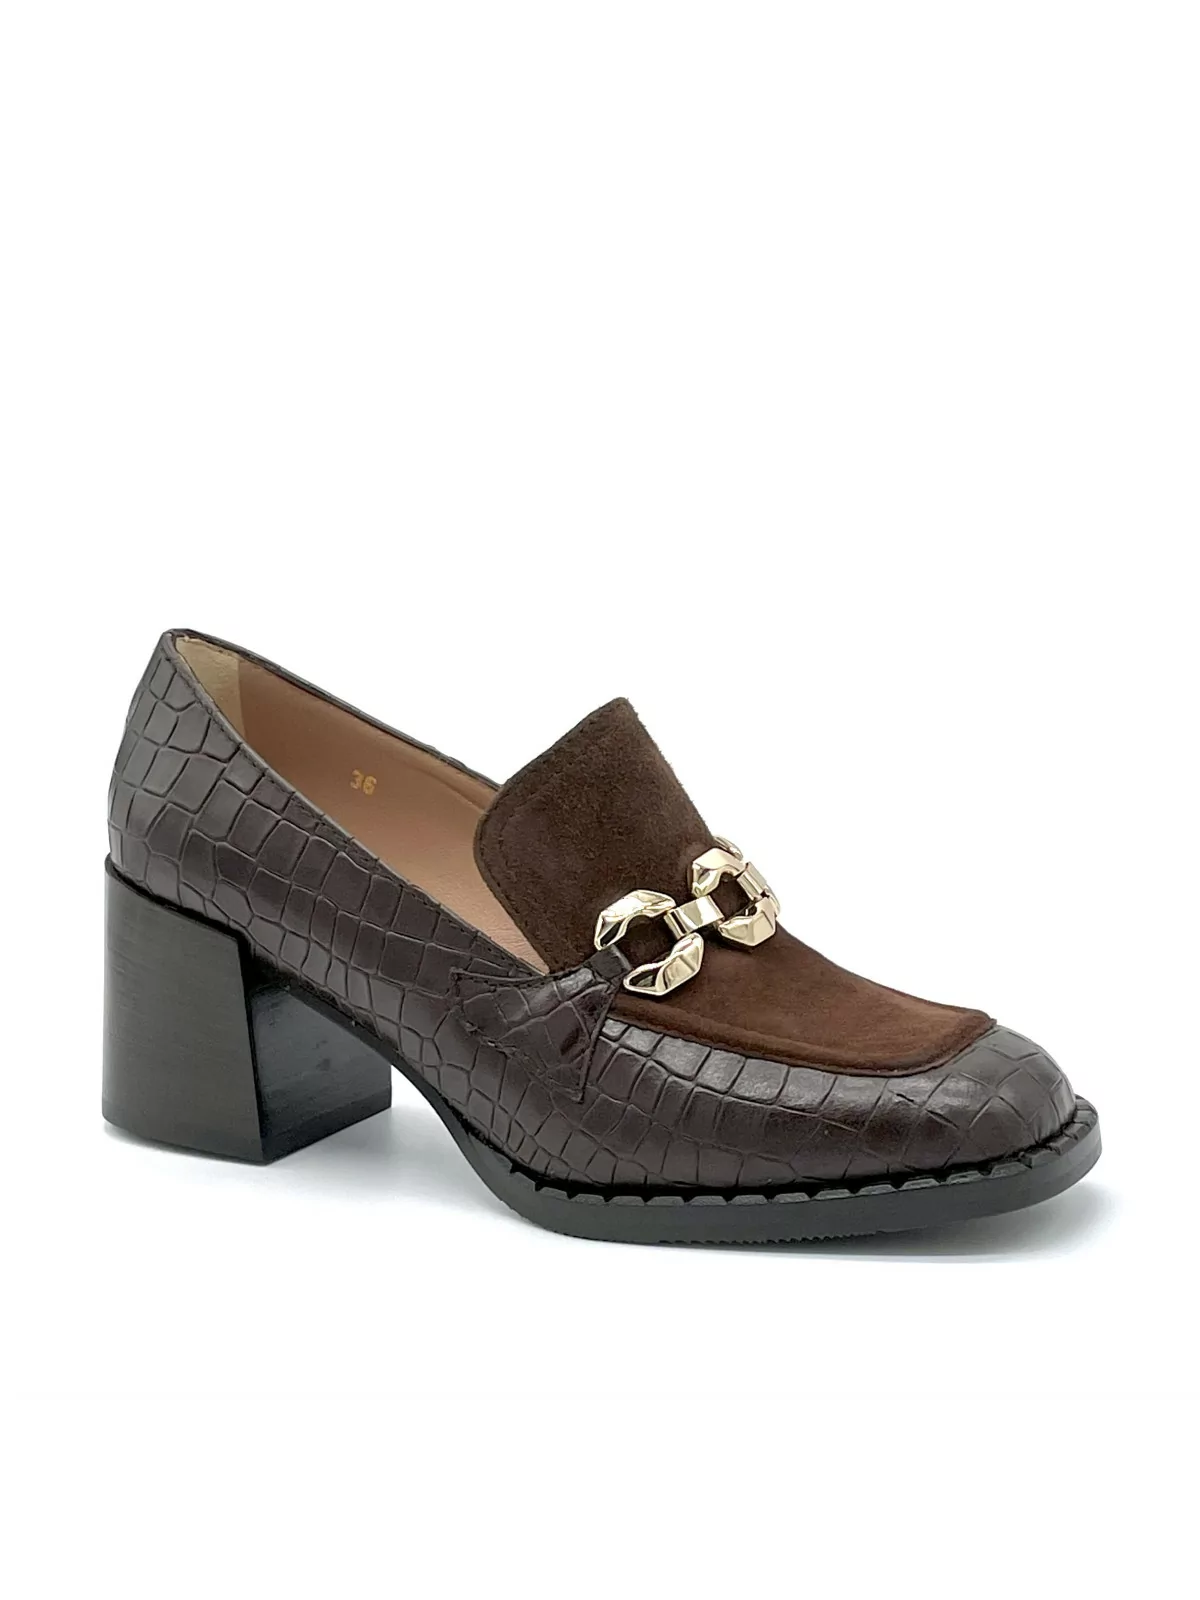 Brown printed leather and suede moccasin with metal buckle. Leather lining, rubb